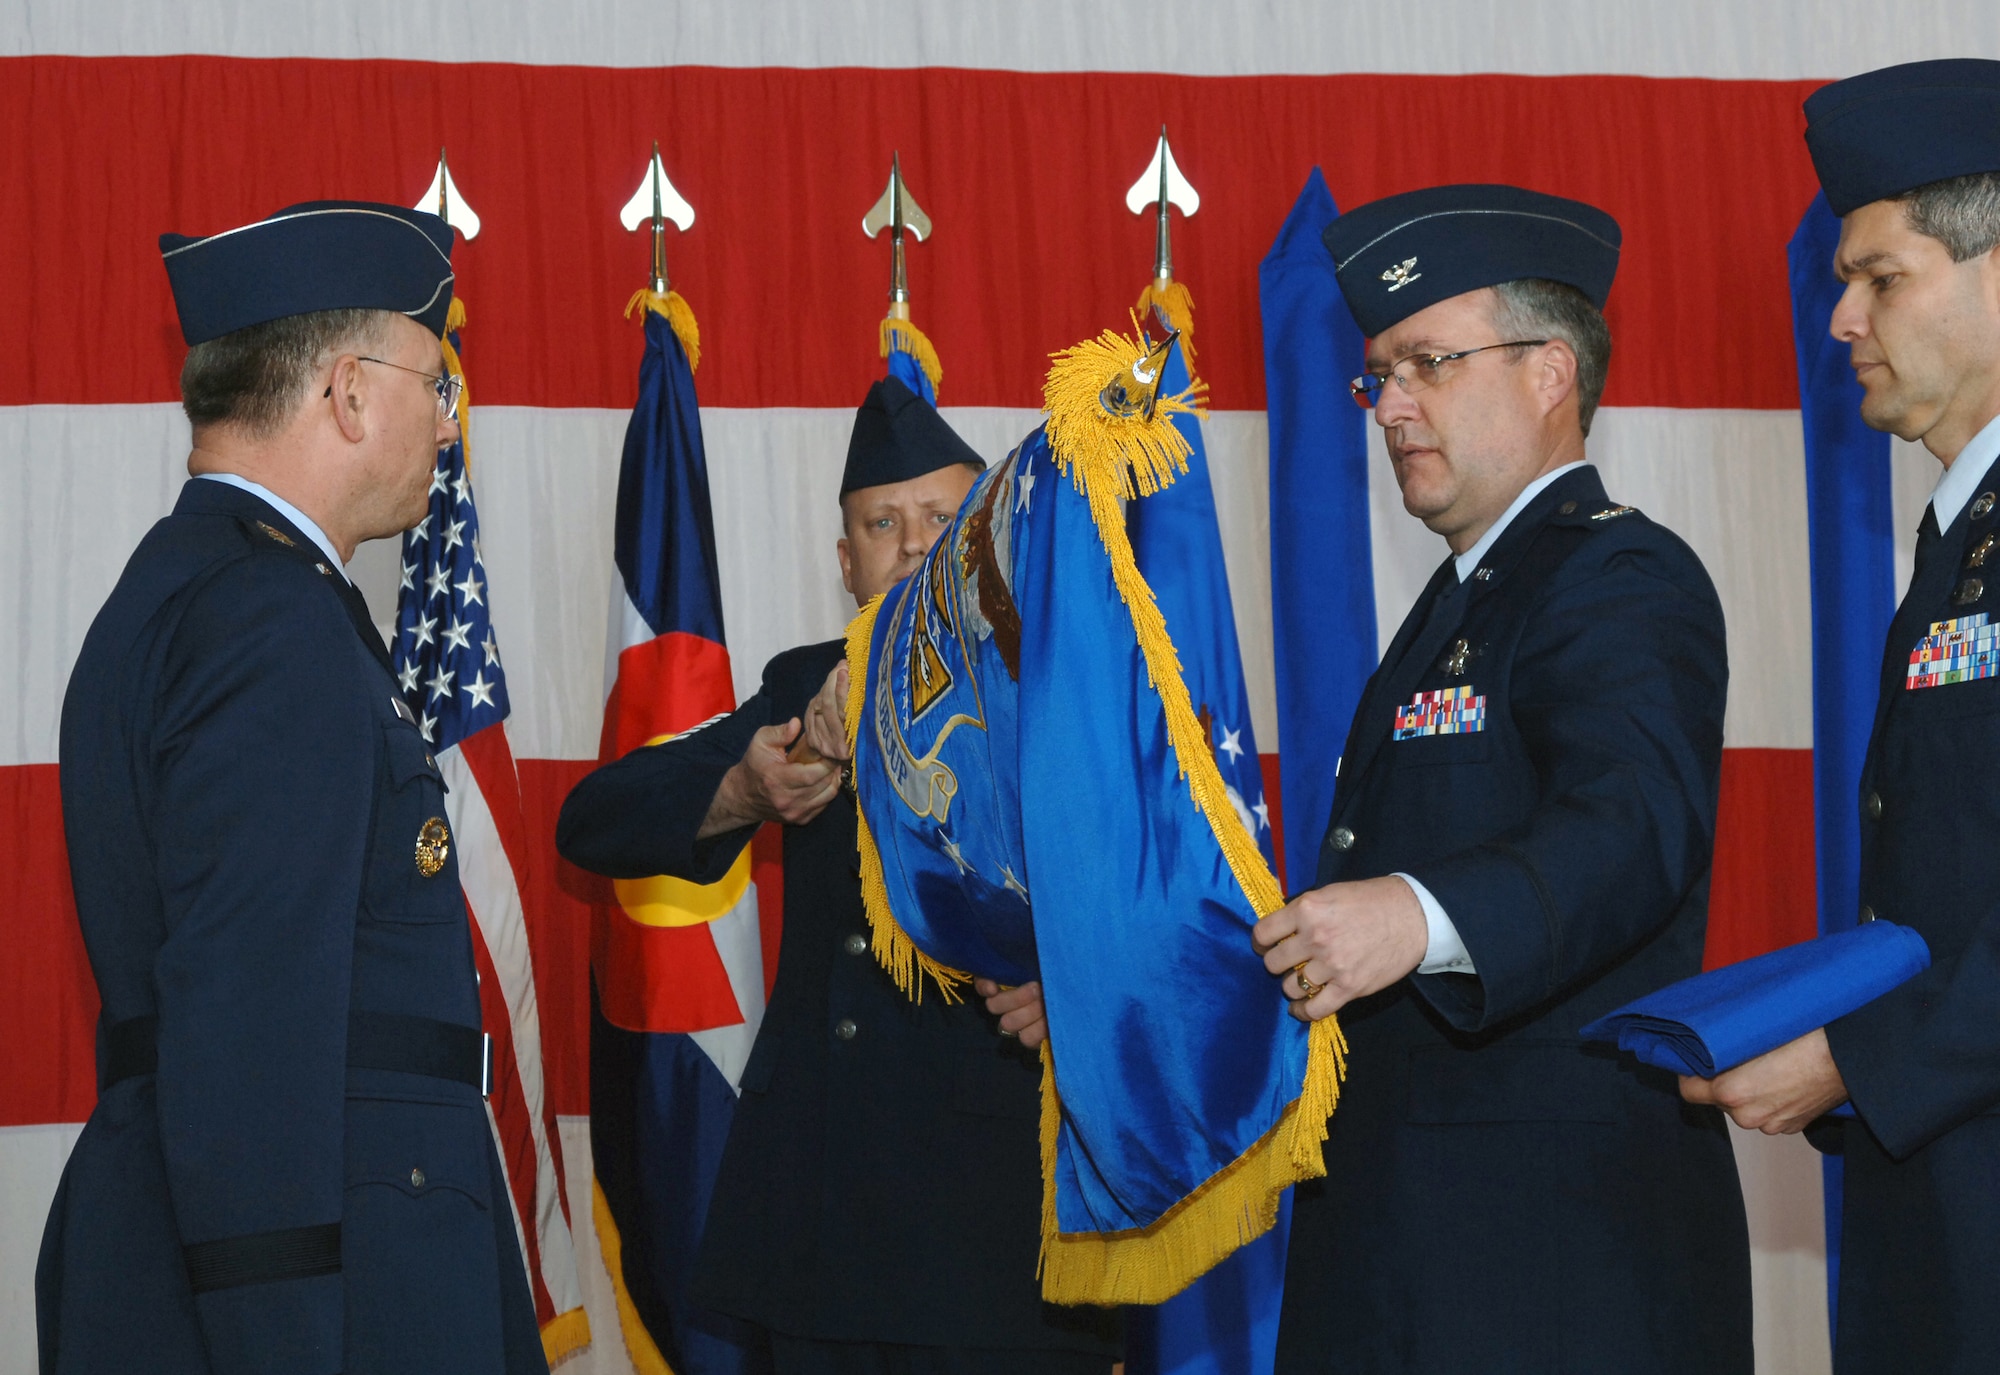 Col. Jeff Ansted, newly installed commander of the Air Force Reserve's 310th Space Wing, unfurls the wing's colors during an activation ceremony April 4 at Peterson Air Force Base, Colo.  Lt. Gen. John Bradley, left, chief of Air Force Reserve and commander of Air Force Reserve Command, officially stood up the AFRC's first-ever space wing. 

The 310th provides its gaining major command, Air Force Space Command, with experienced people in seven space squadrons to man space-based systems including Defense Meteorological satellites for weather observation, Midcourse Space Experiment satellite to conduct space surveillance, the Space-Based Infrared System for early missile warning and Global Positioning System satellites used for navigation.  

The wing also includes a test squadron, several base support squadrons, medical staff and the Reserve National Security Space Institute.  In all, ten squadrons, five stand-alone flights and the institute report to the 310th SW.

(U.S. Air Force Photo/Amber K. Whittington)